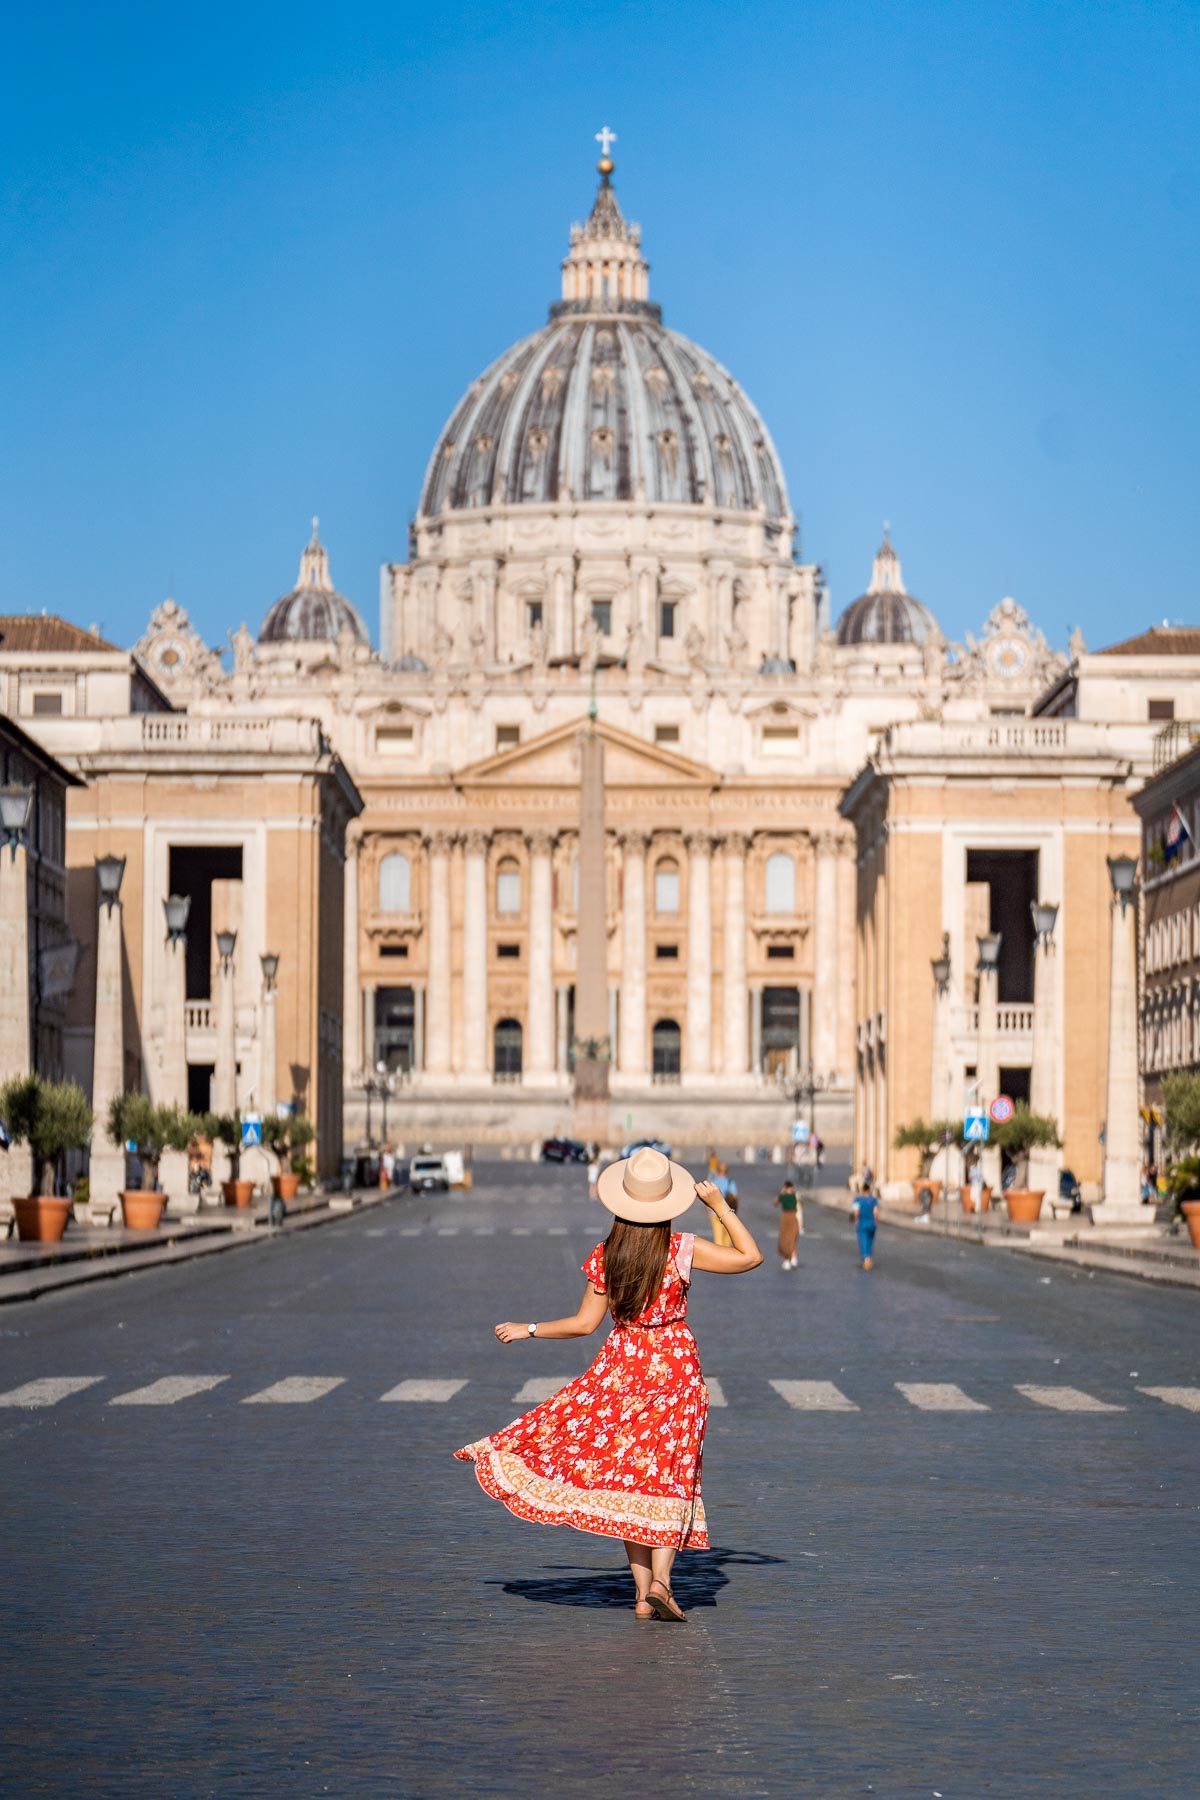 Girl in a red dress in front of St. Peter's Basilica, Vatican City